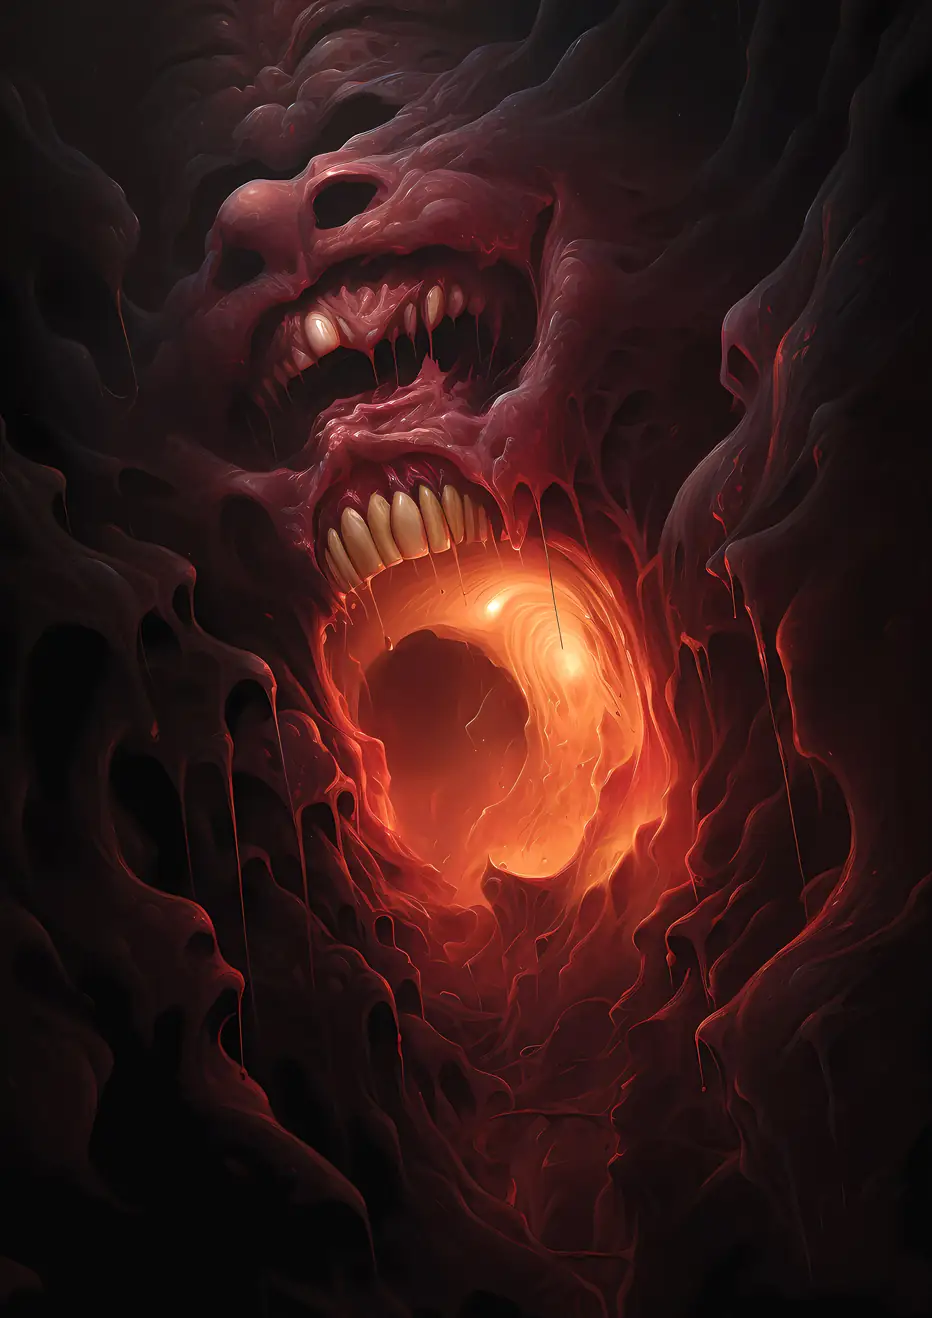 Eldritch Fusion. A nightmarish cavern made from pulsating flesh, with a fiery orange abyss and a grotesque face.